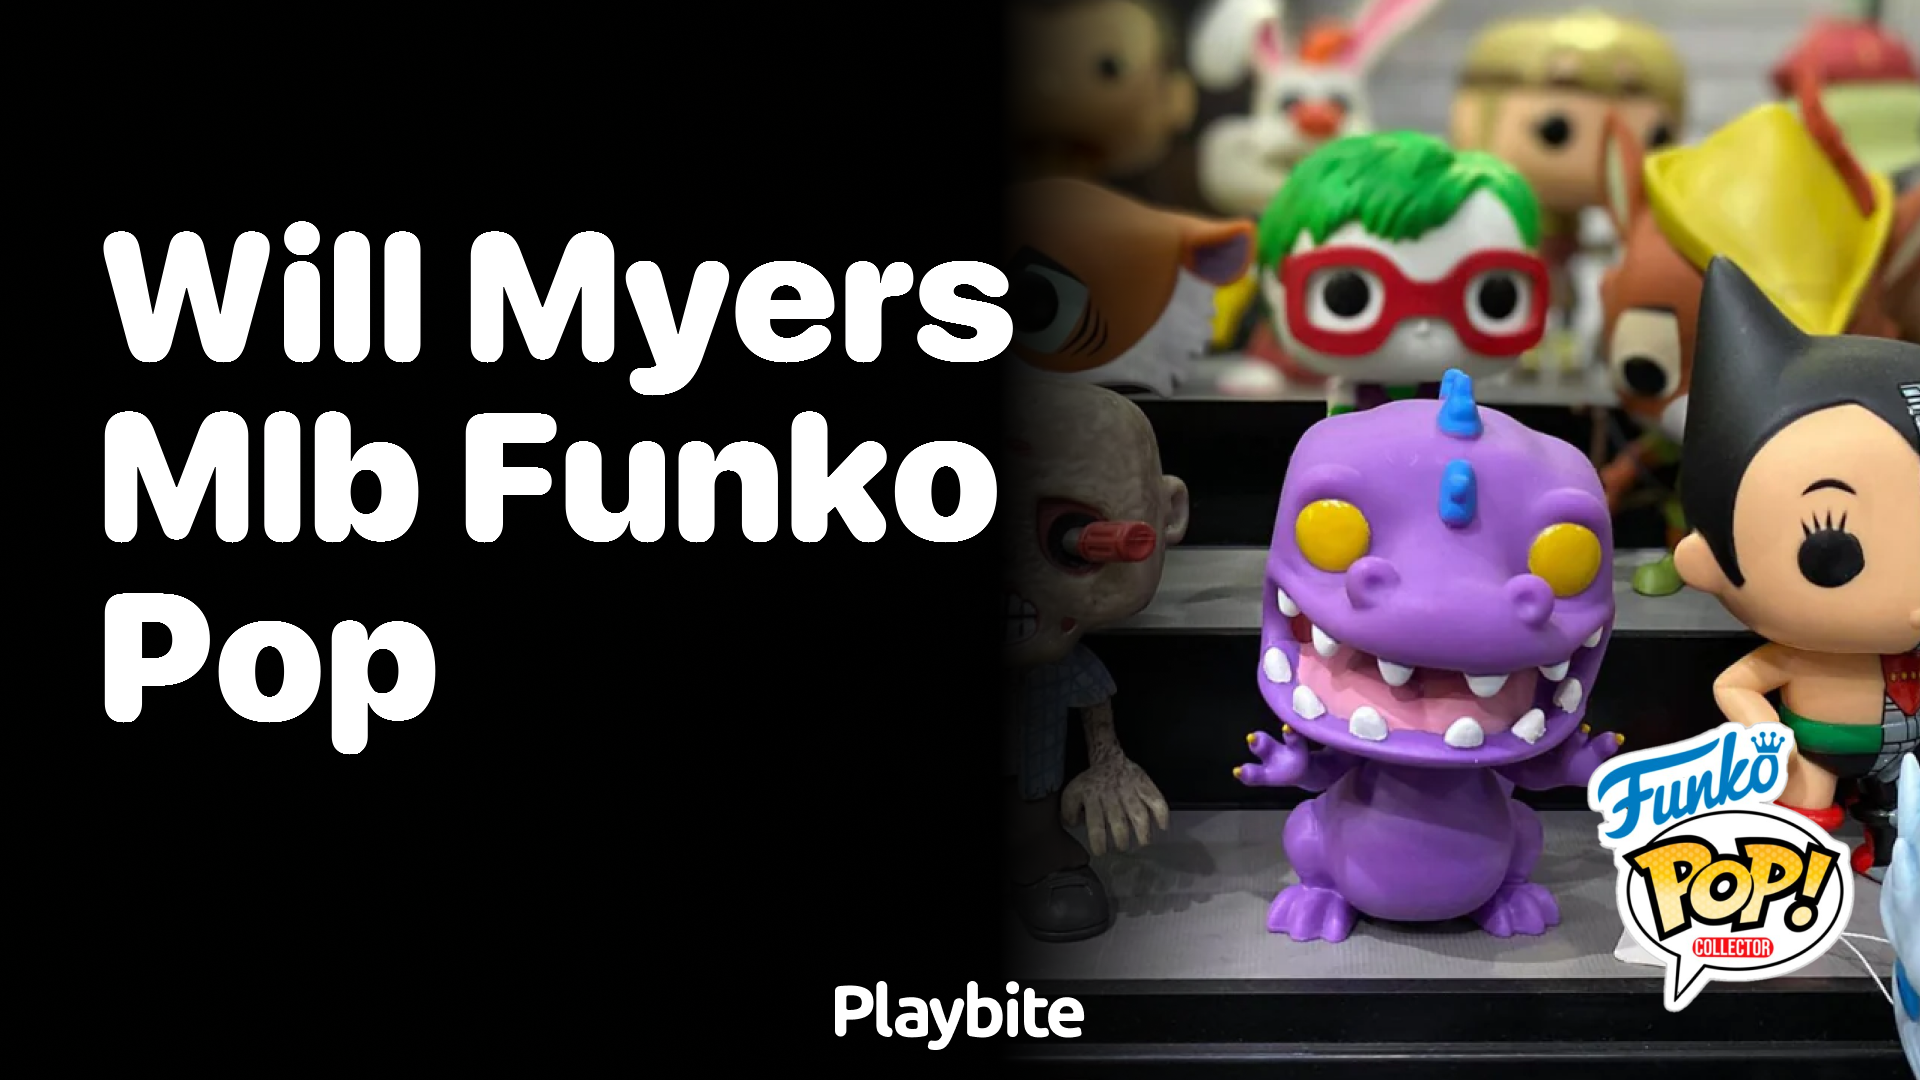 Is there a Will Myers MLB Funko Pop?